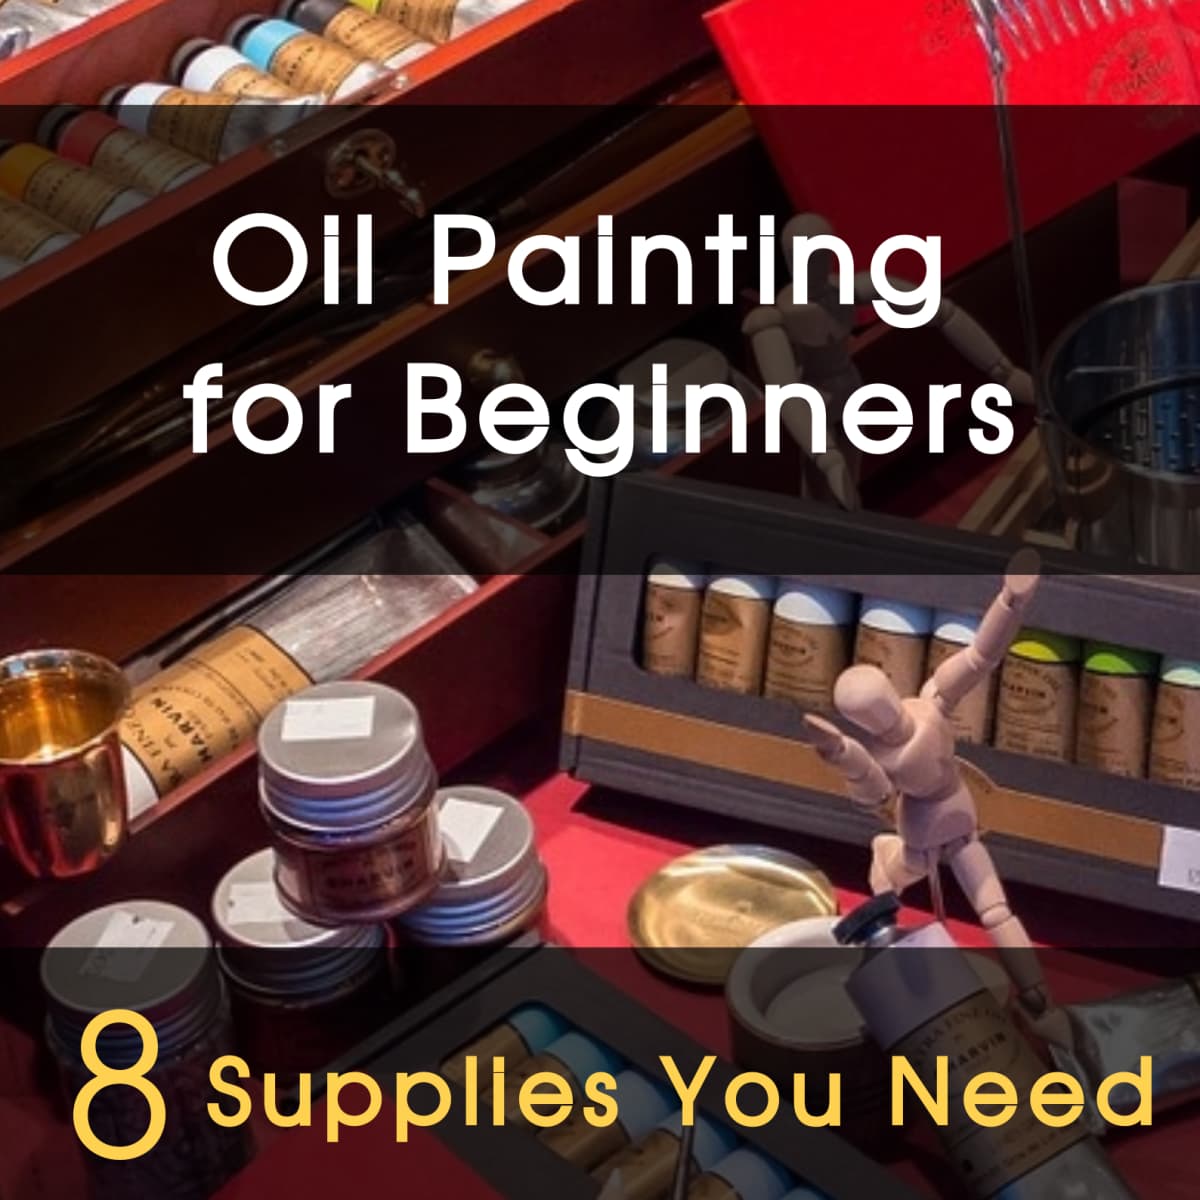 A Complete List of Oil Painting Supplies that every Beginning Oil